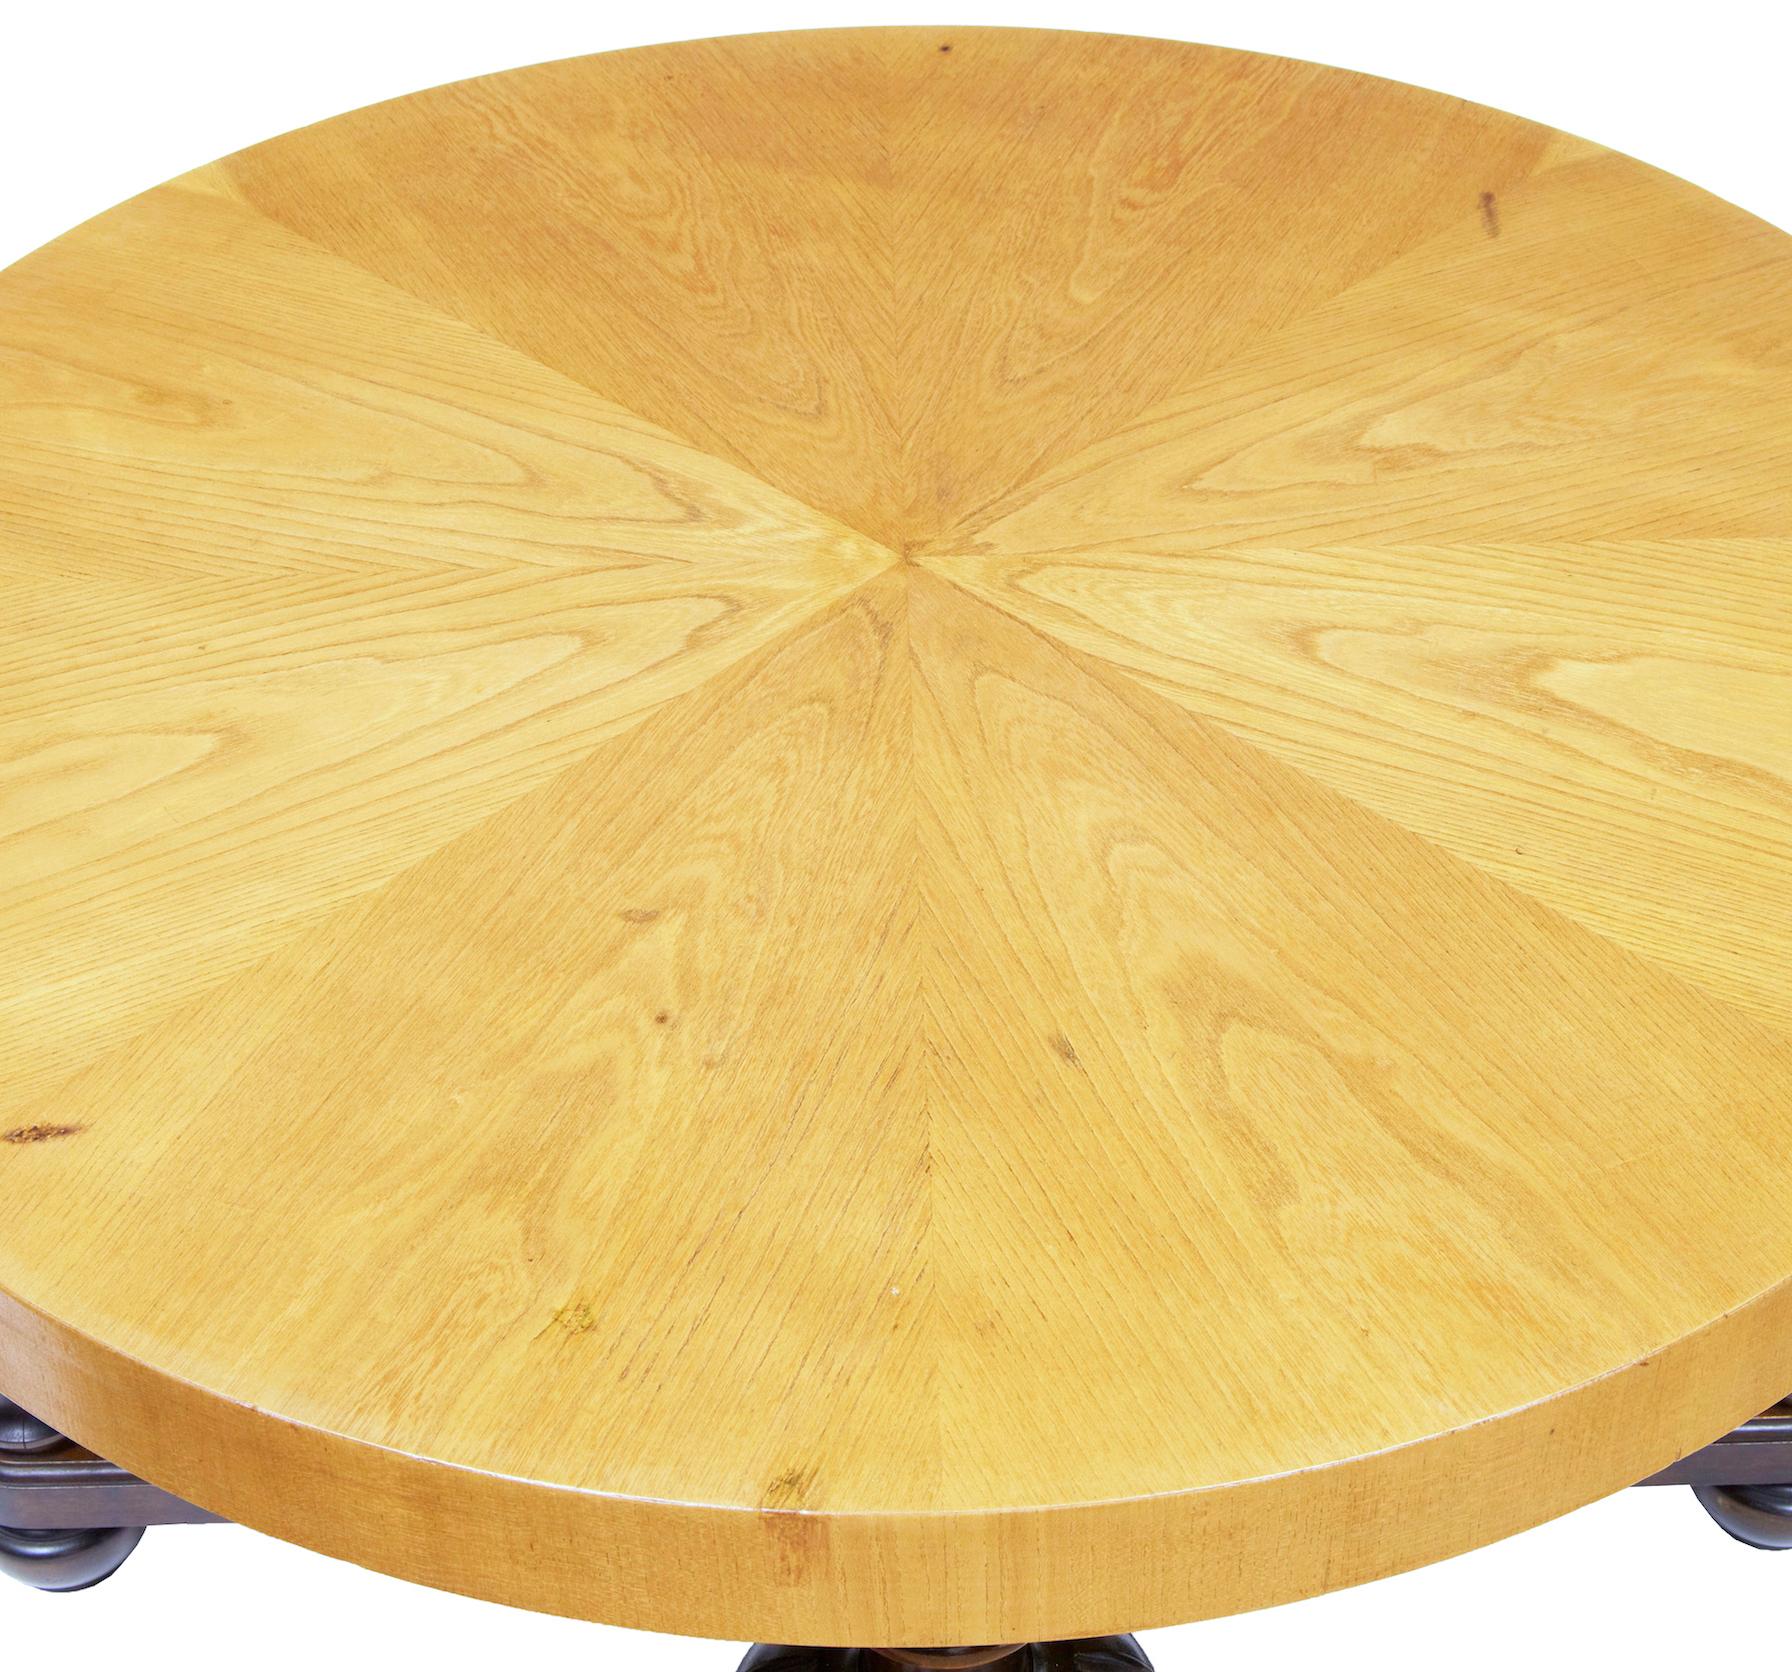 Swedish art deco elm and birch coffee table circa 1930.

Segmented elm circular top surface, standing on 4 bulbous and fluted legs, united by an x frame stretcher.  Standing on turned feet.

Minor restorations to veneer.